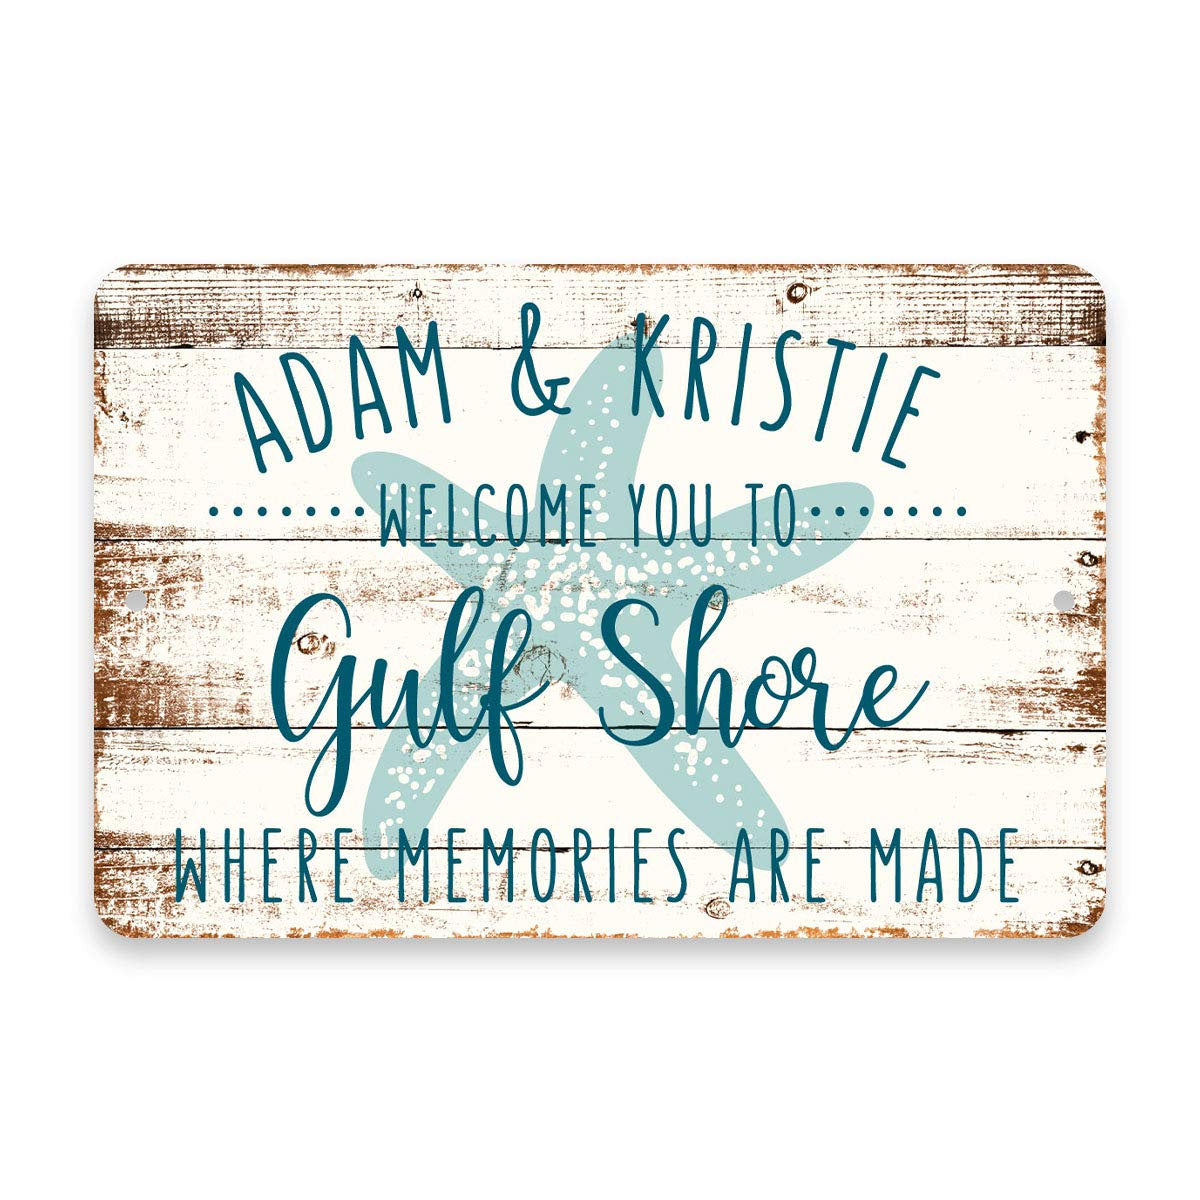 Personalized Welcome to Gulf Shores Where Memories are Made Sign - 8 X 12 Metal Sign with Wood Look